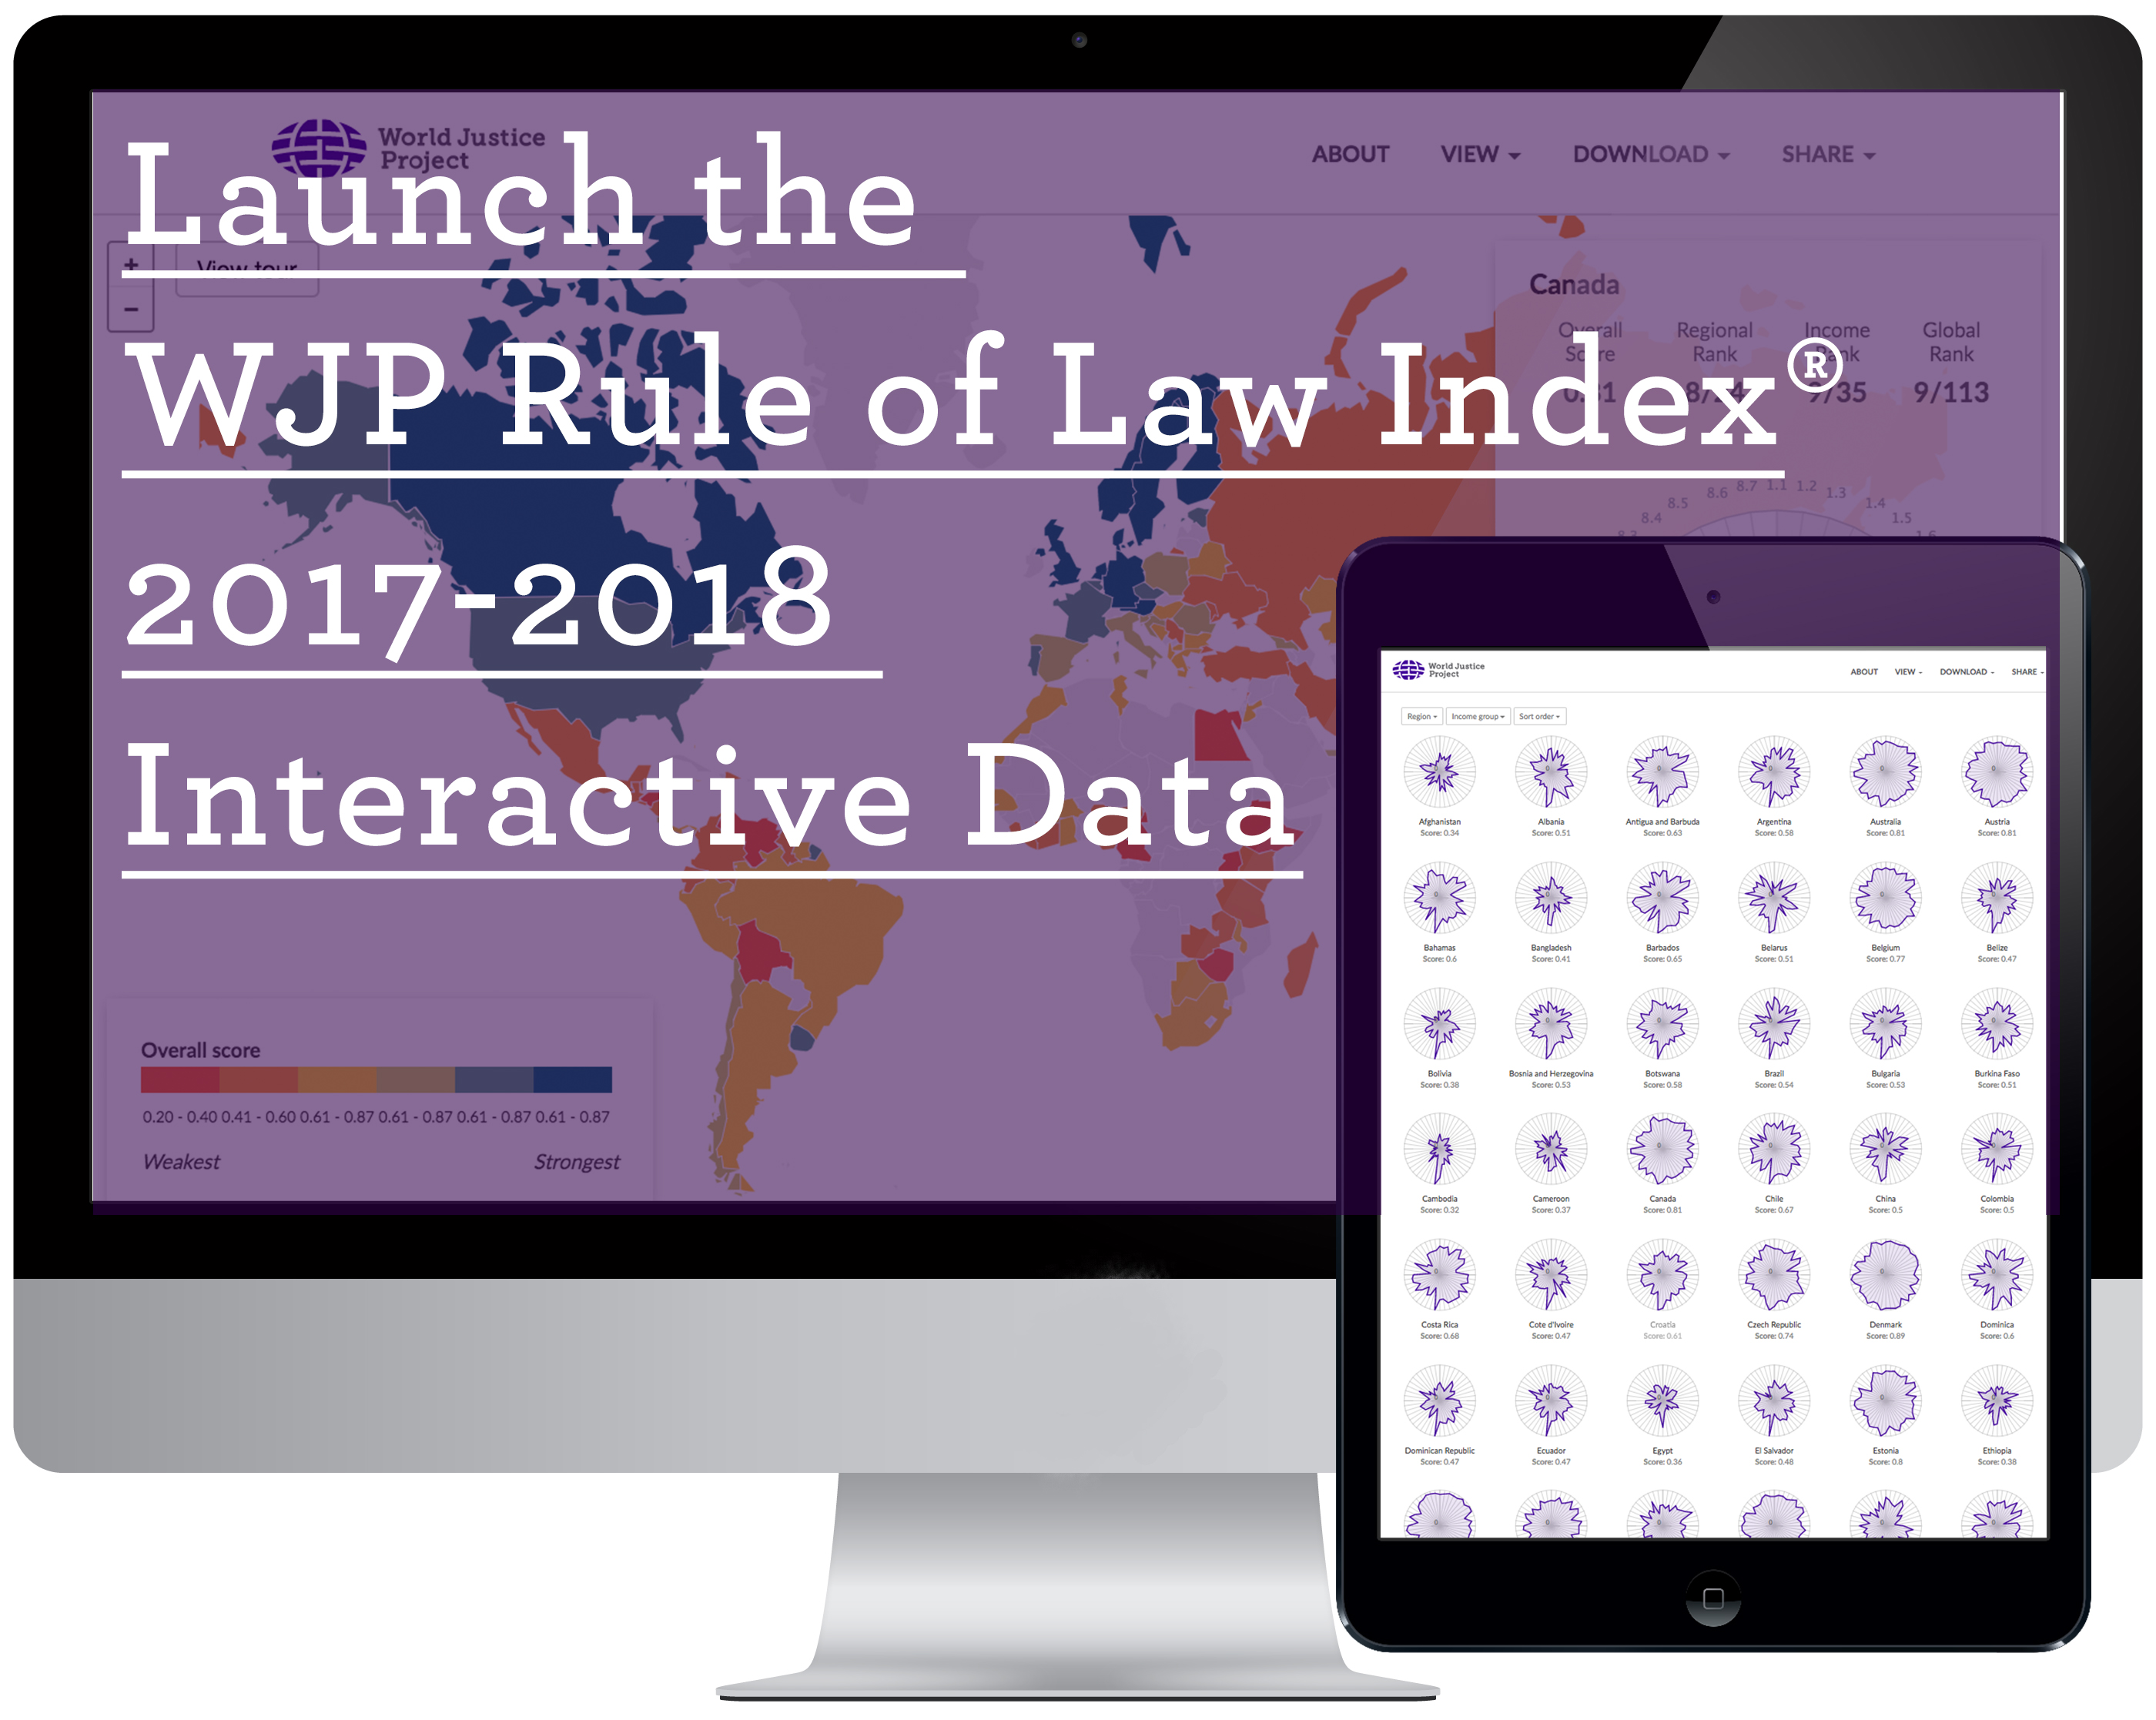 Interactive Data for the WJP Rule of Law Index